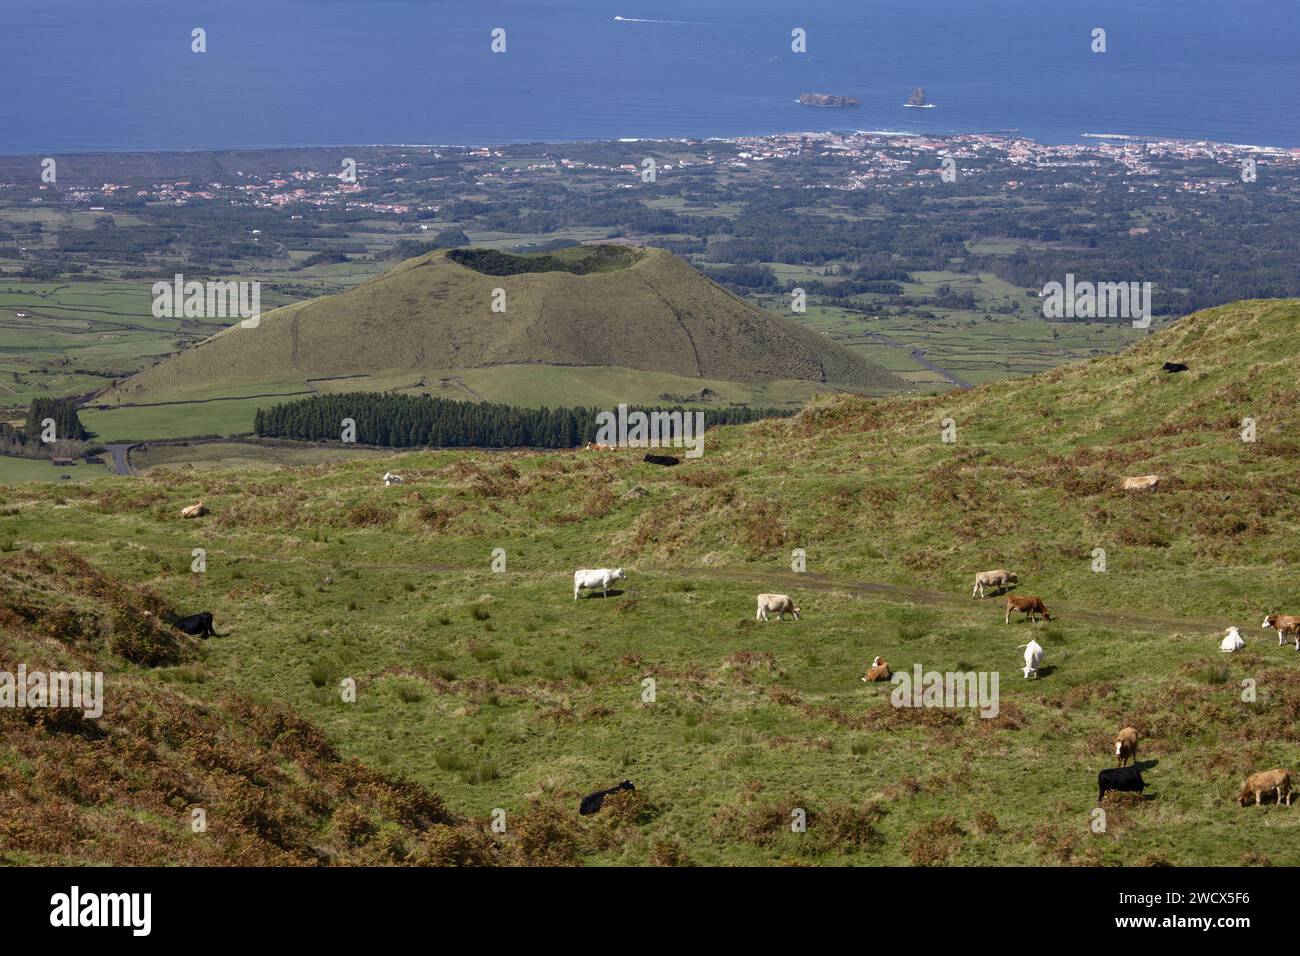 Portugal, Azores archipelago, Pico island, cows in the middle of pastures facing an old volcano crater and the ocean Stock Photo